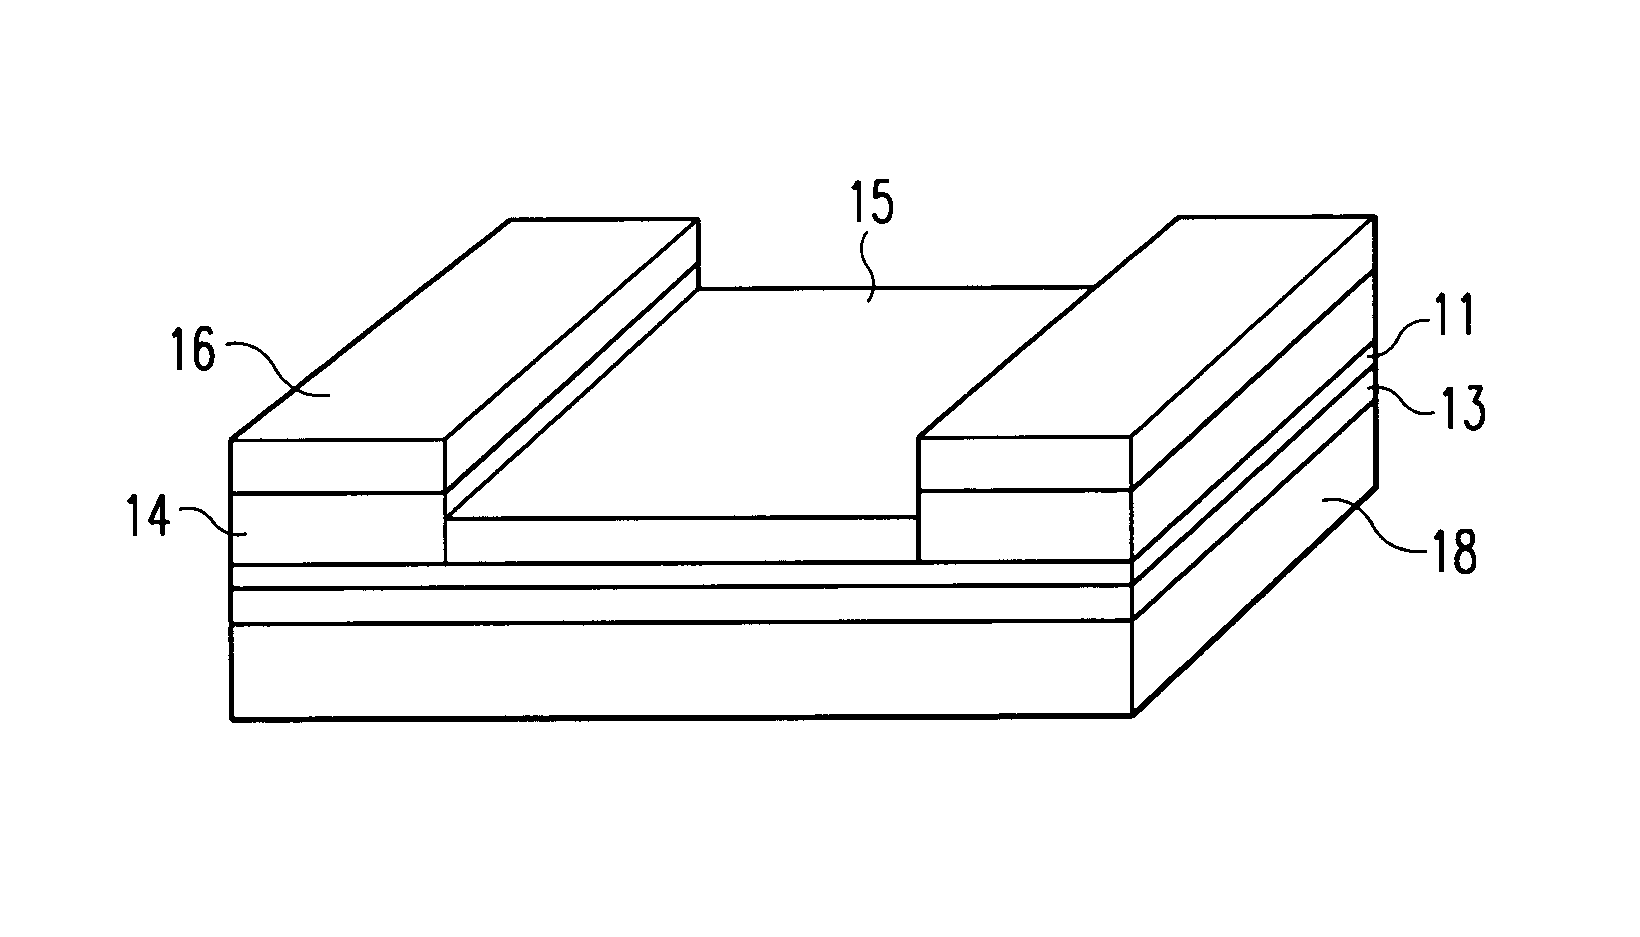 Low-impedance electrical resistor and process for the manufacture of such resistor